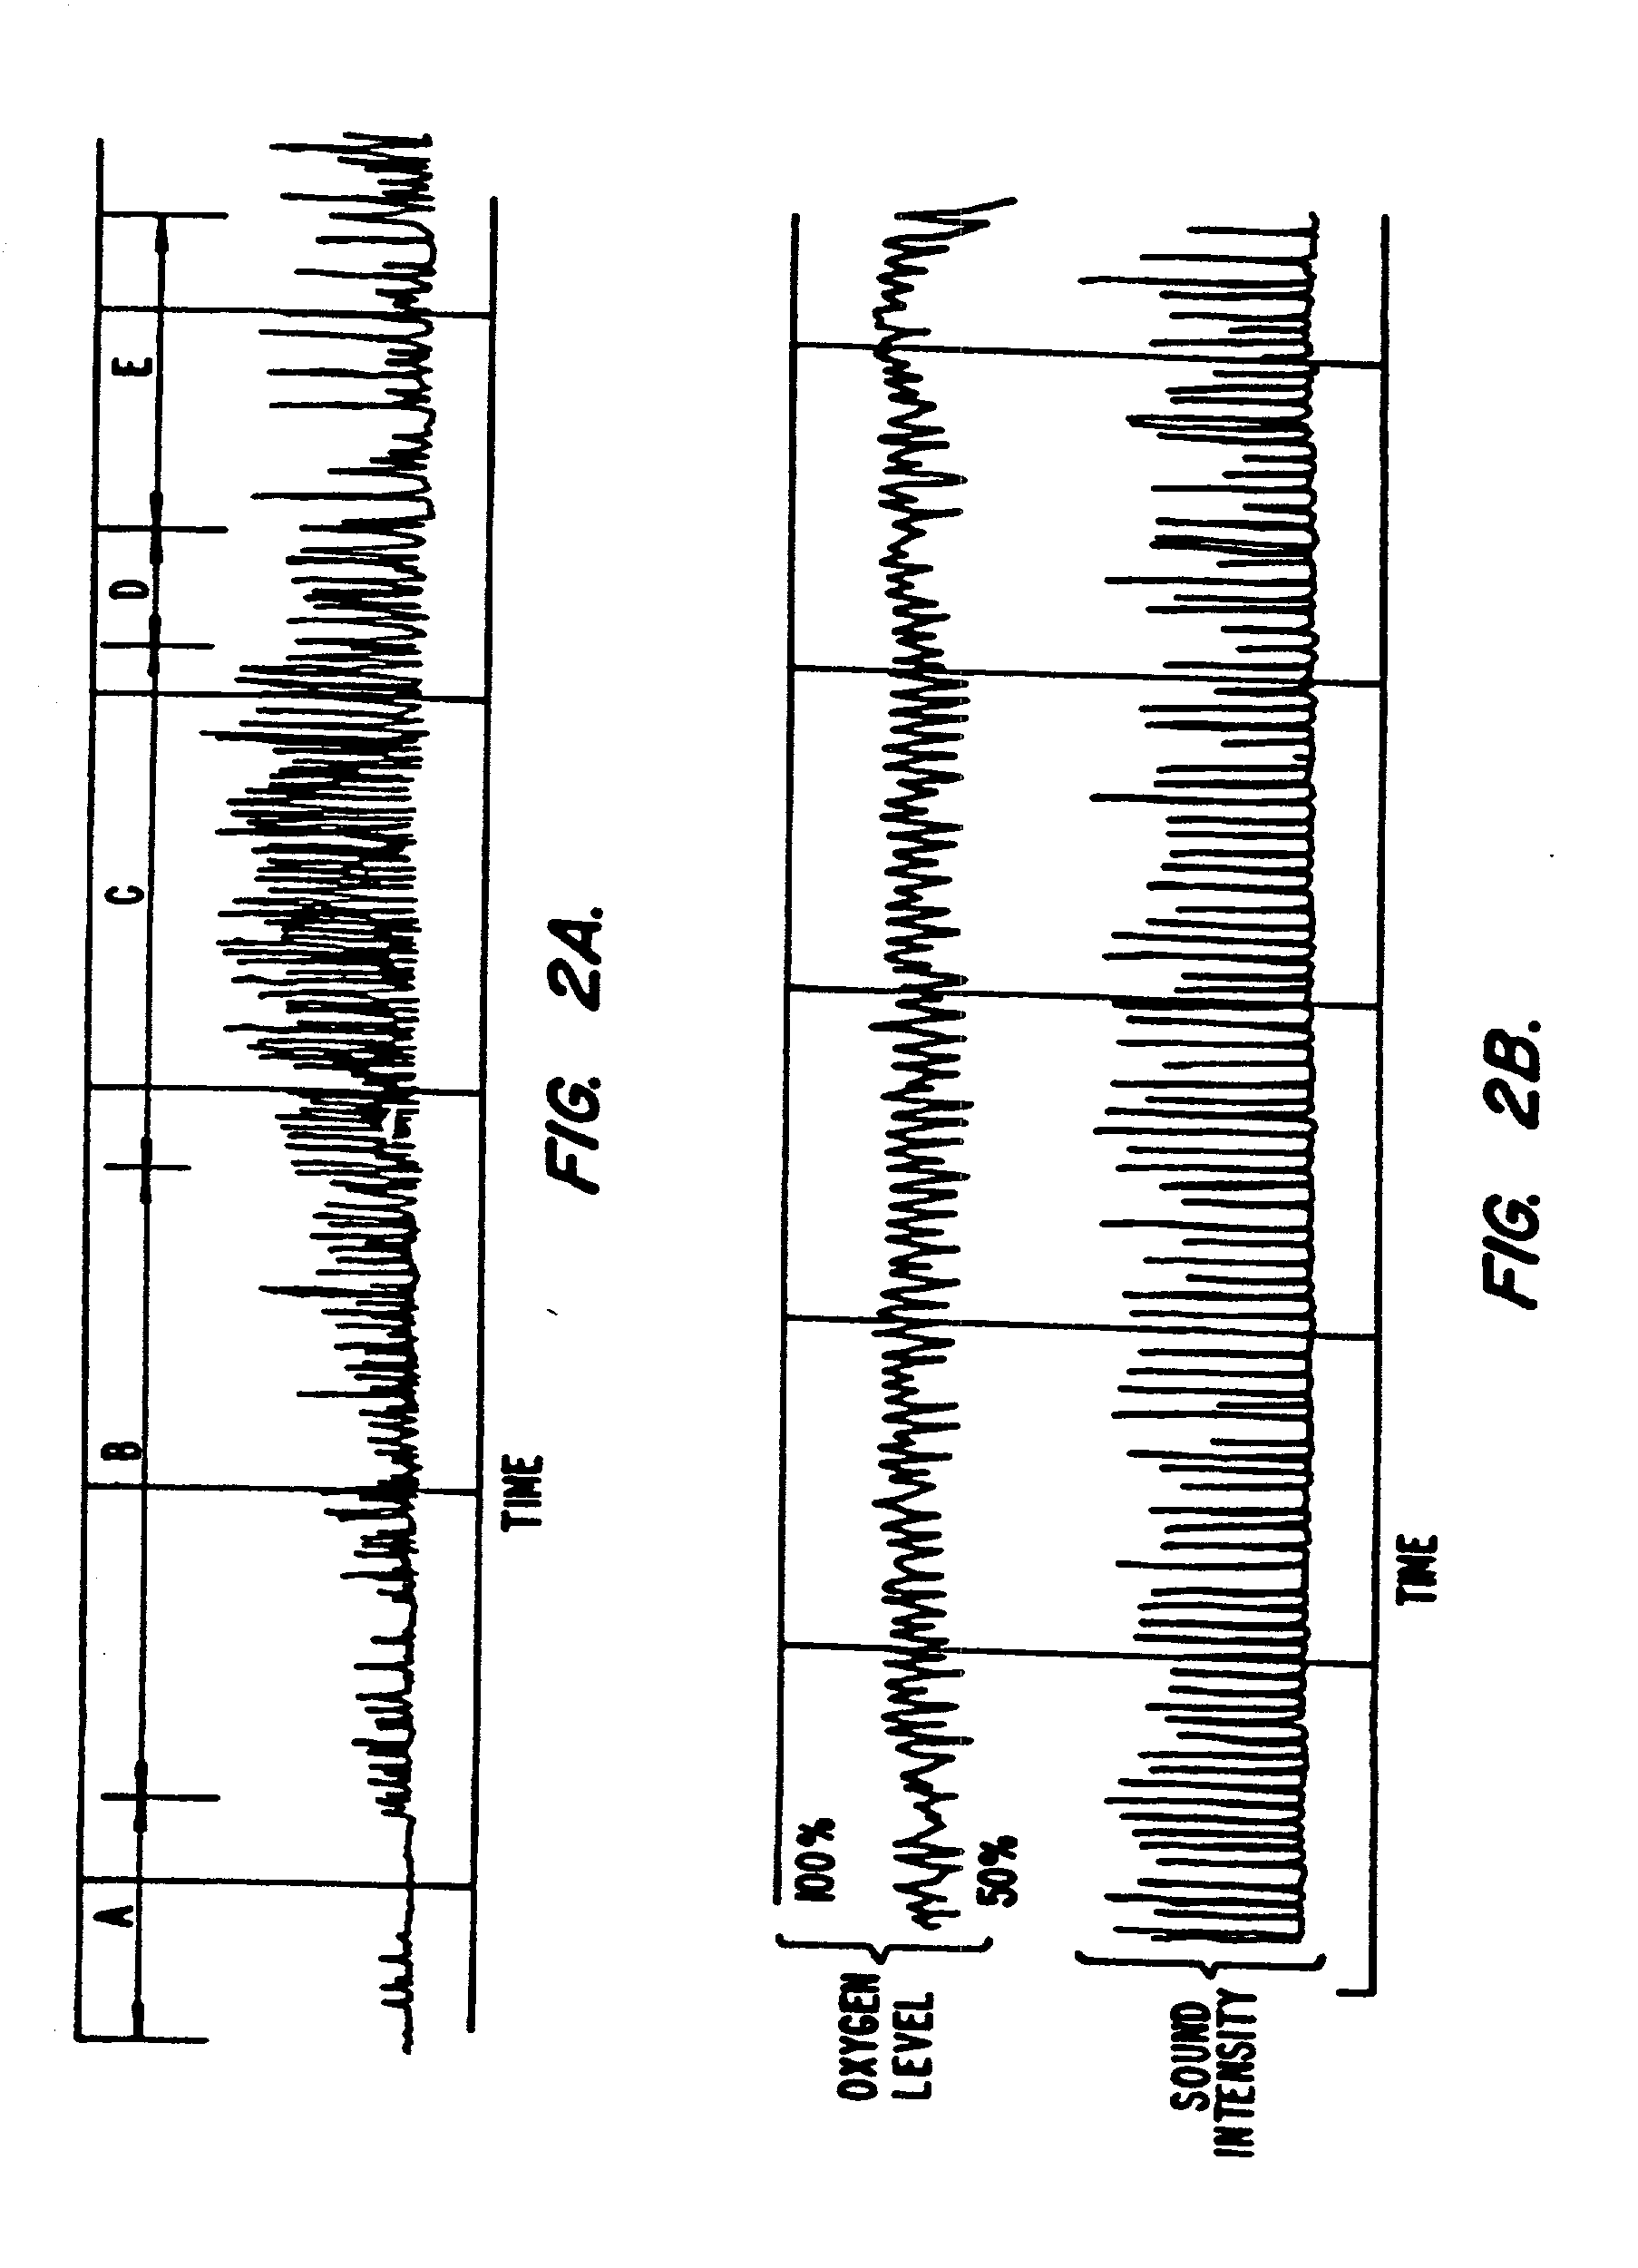 Method and apparatus useful in the diagnosis of obstructive sleep apnea of a patient